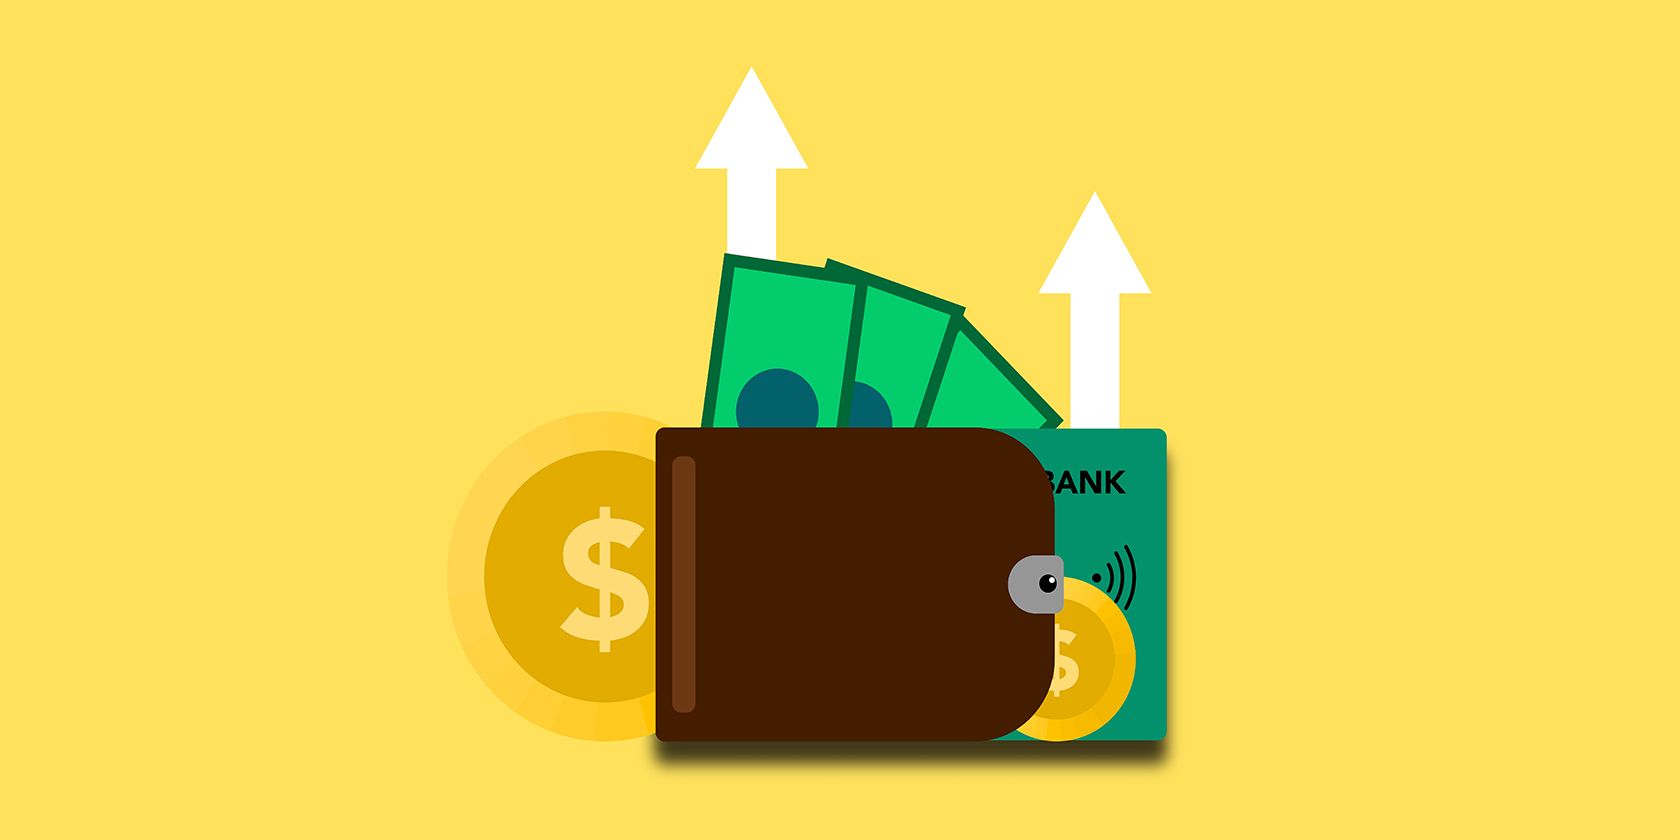 An image of a wallet, money, and credit card